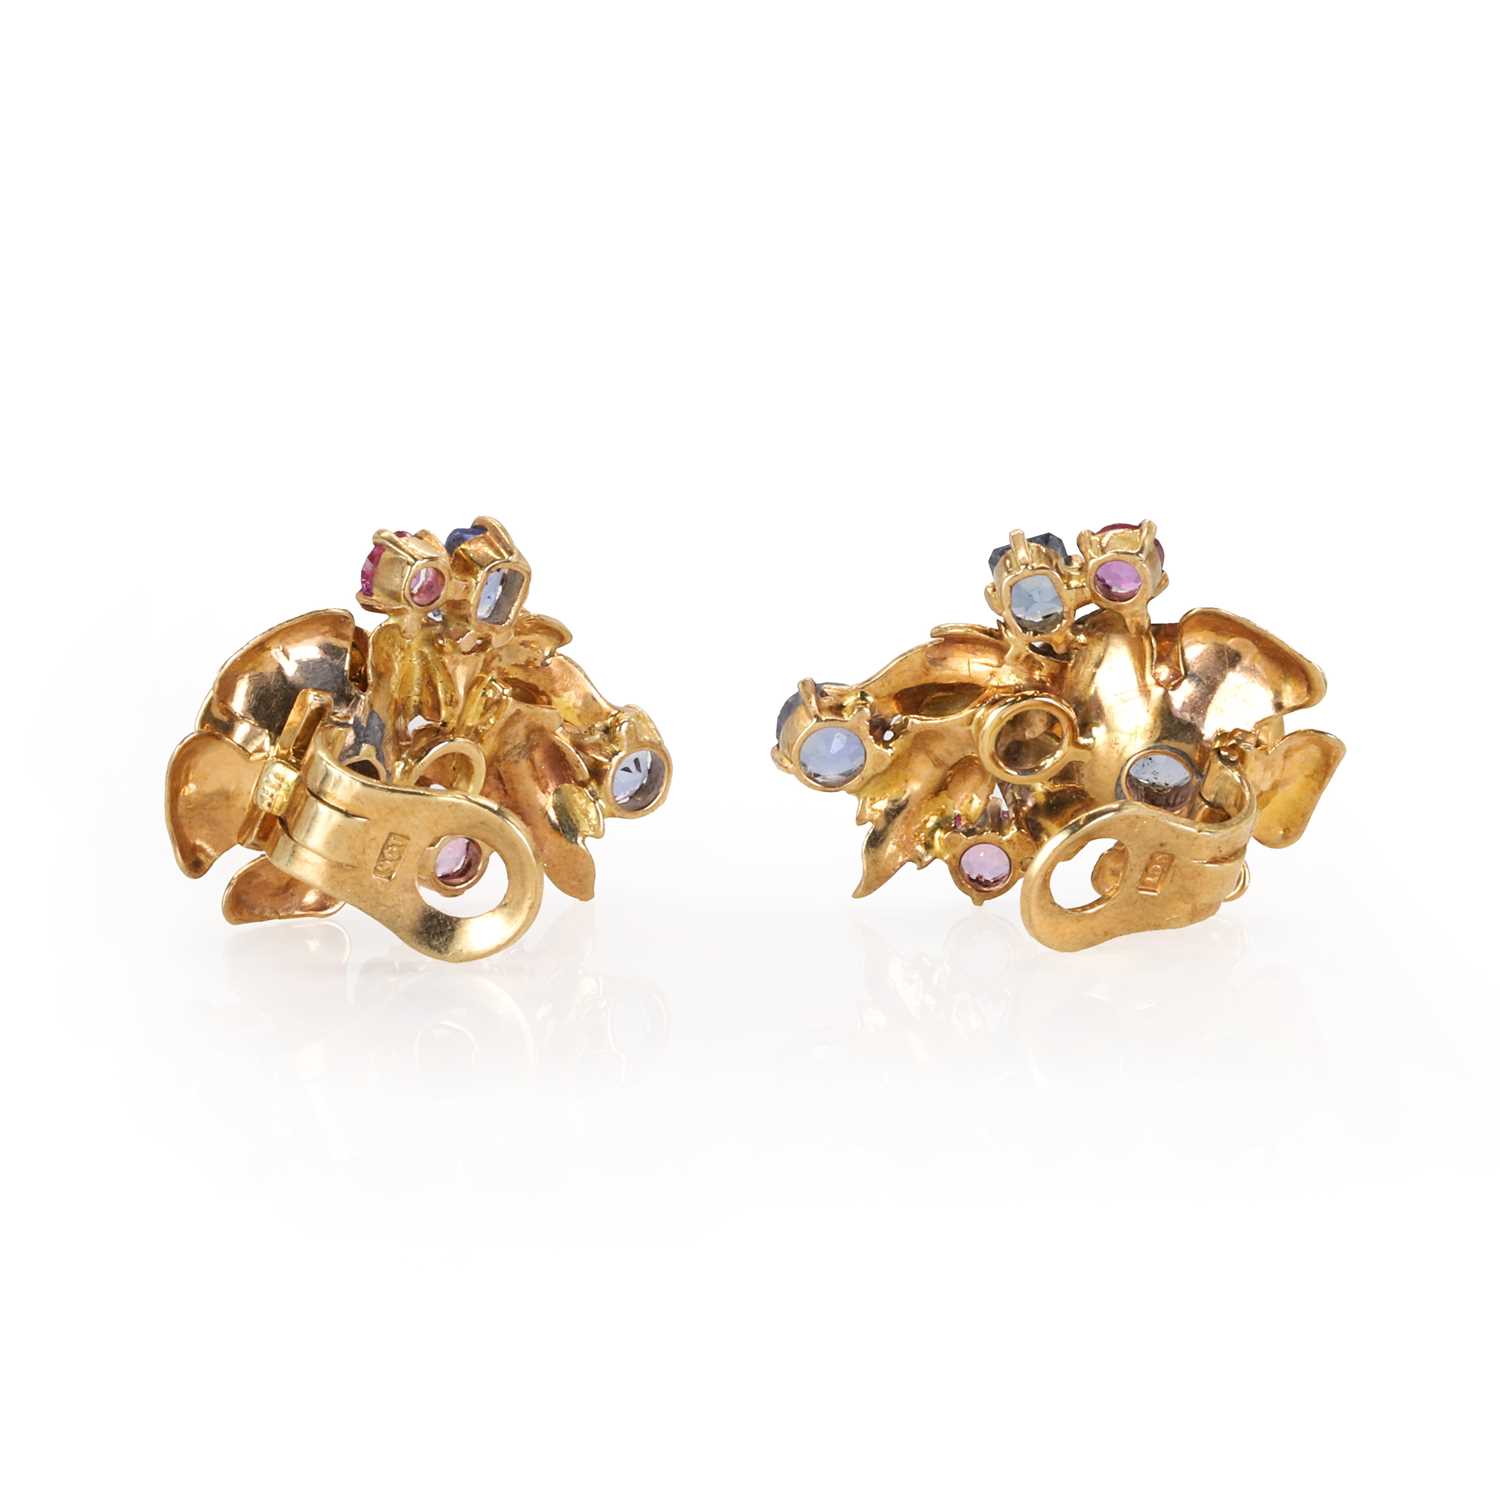 A pair of rose gold varicoloured sapphire clip earrings, c.1950, - Image 2 of 2